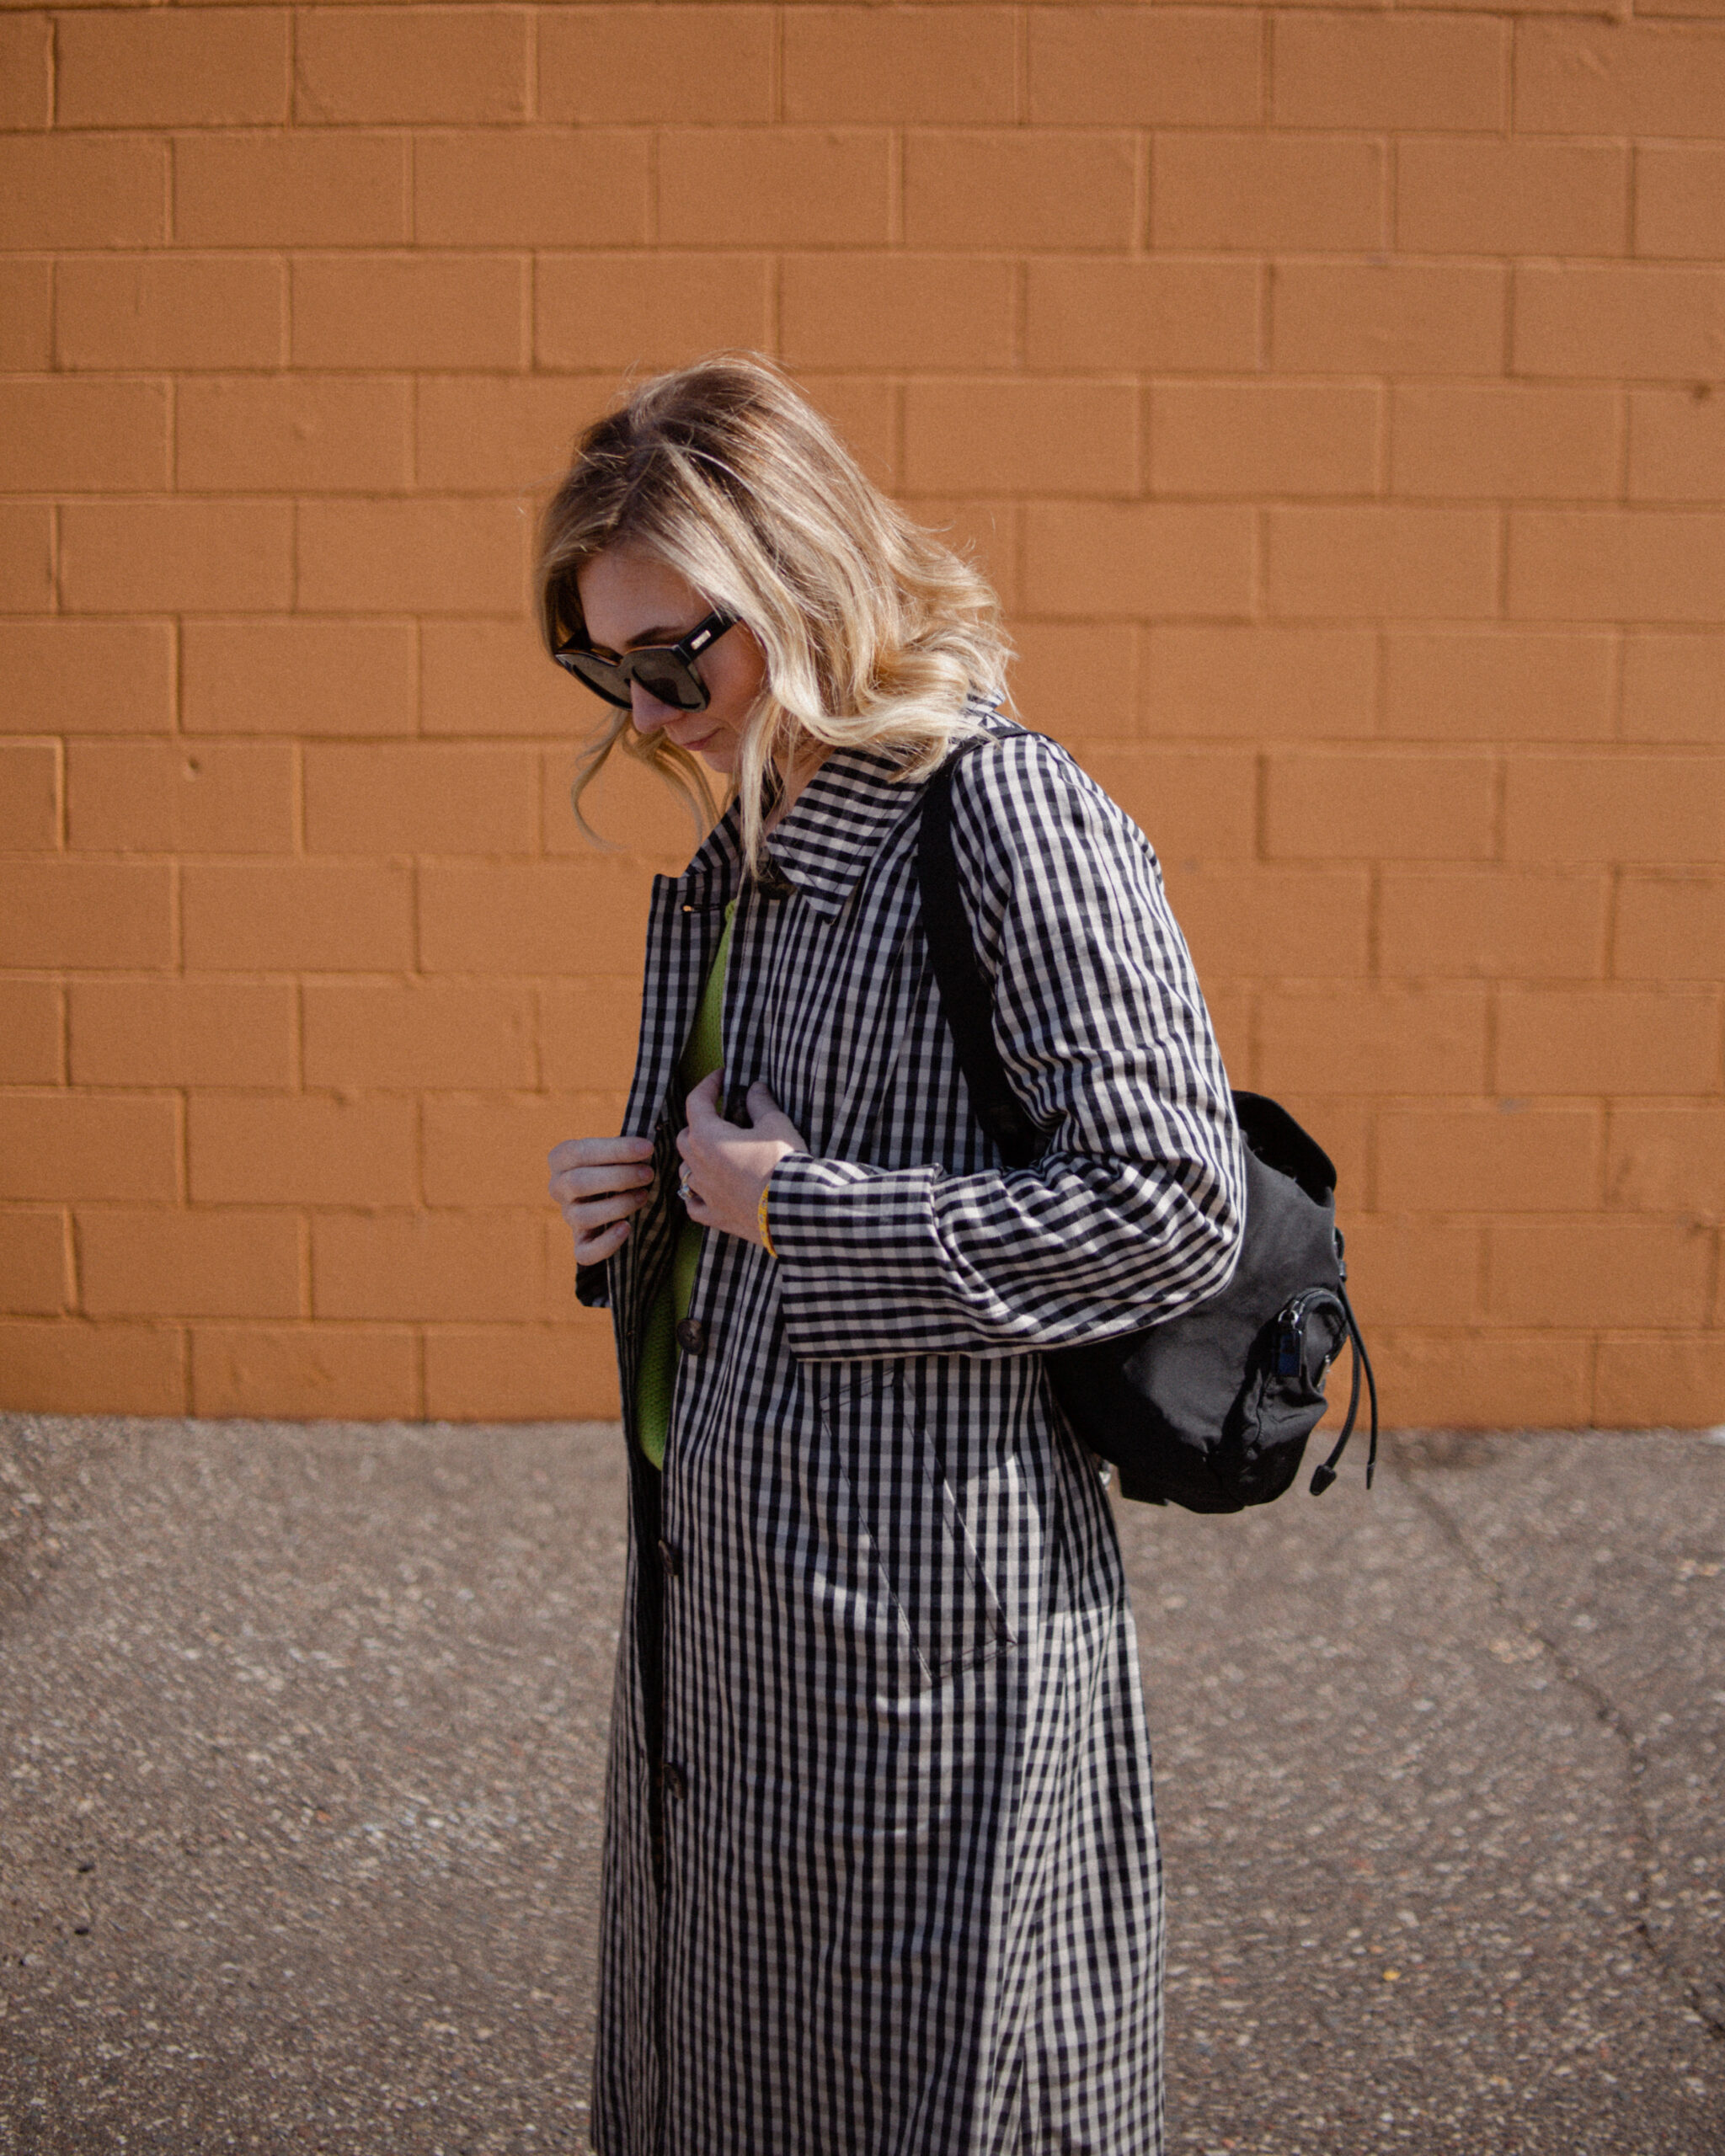 Karin Emily wears a gingham trench coat and light wash way high jeans from the Everlane March Edit